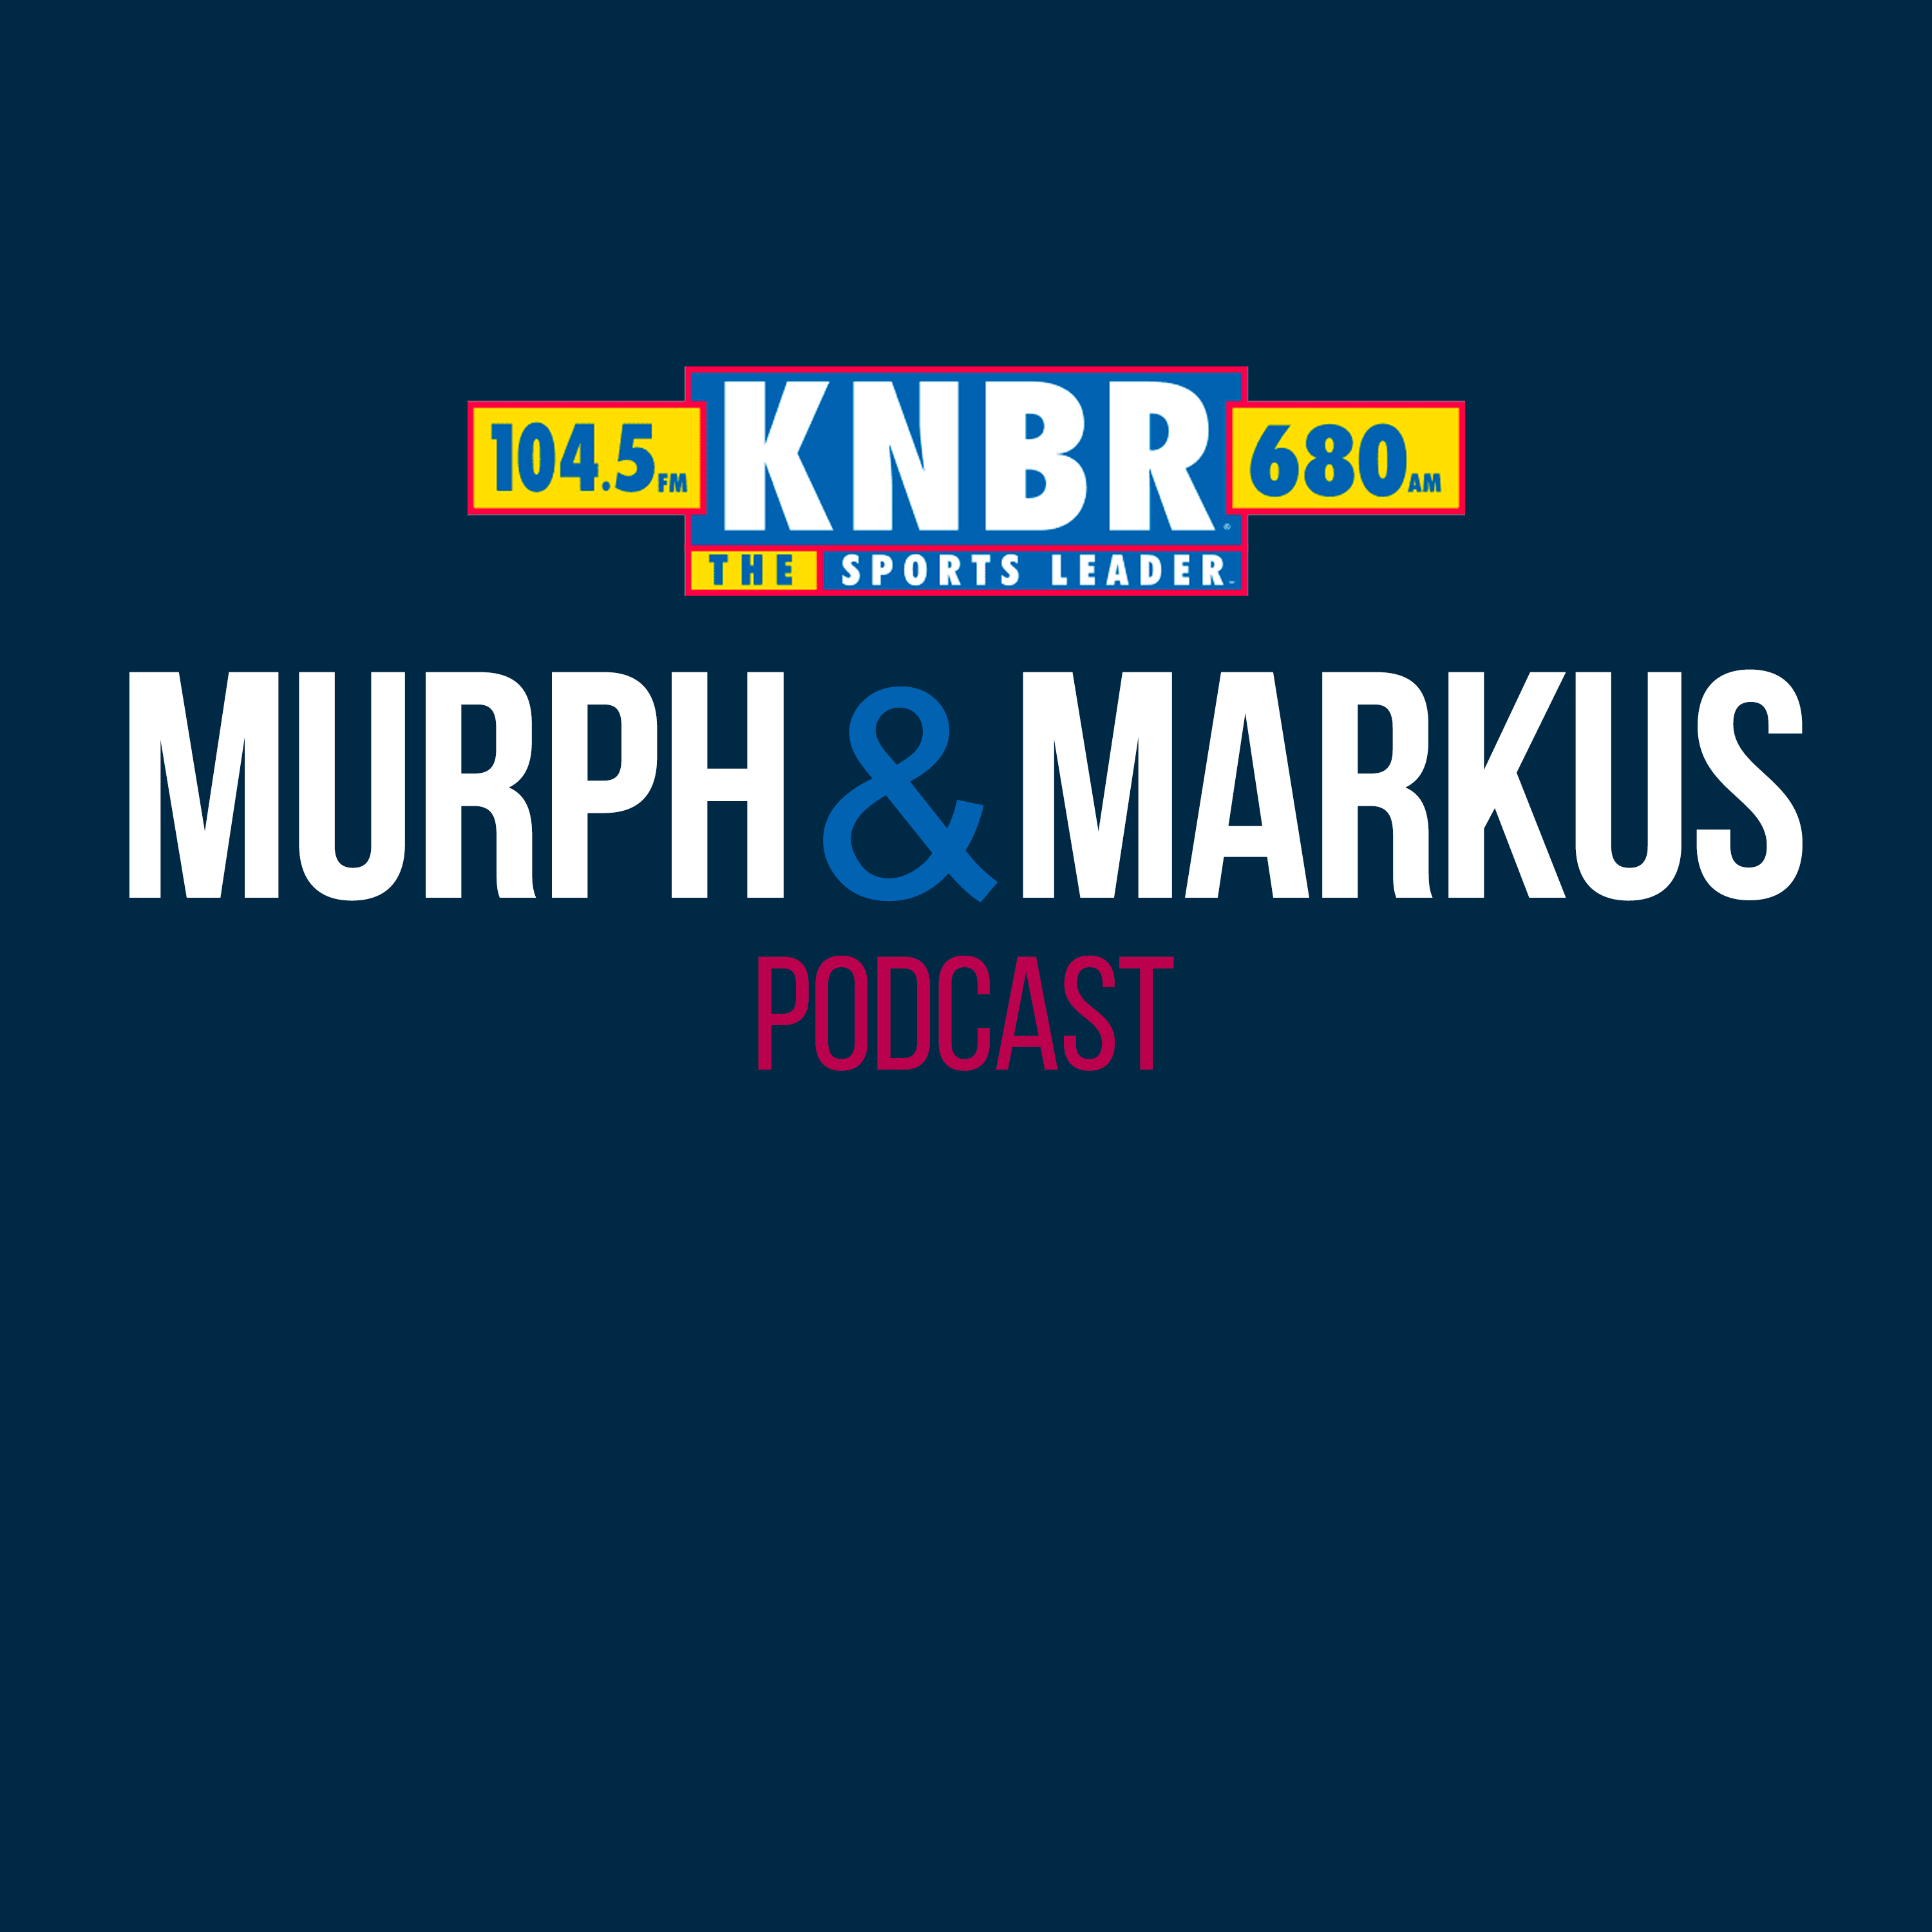 4-19 Hour 2: Murph & Markus react to Farhan Zaidi's comments on Tolbert & Copes yesterday, talk to Mike Krukow, and get into today's top story in the Big Hit